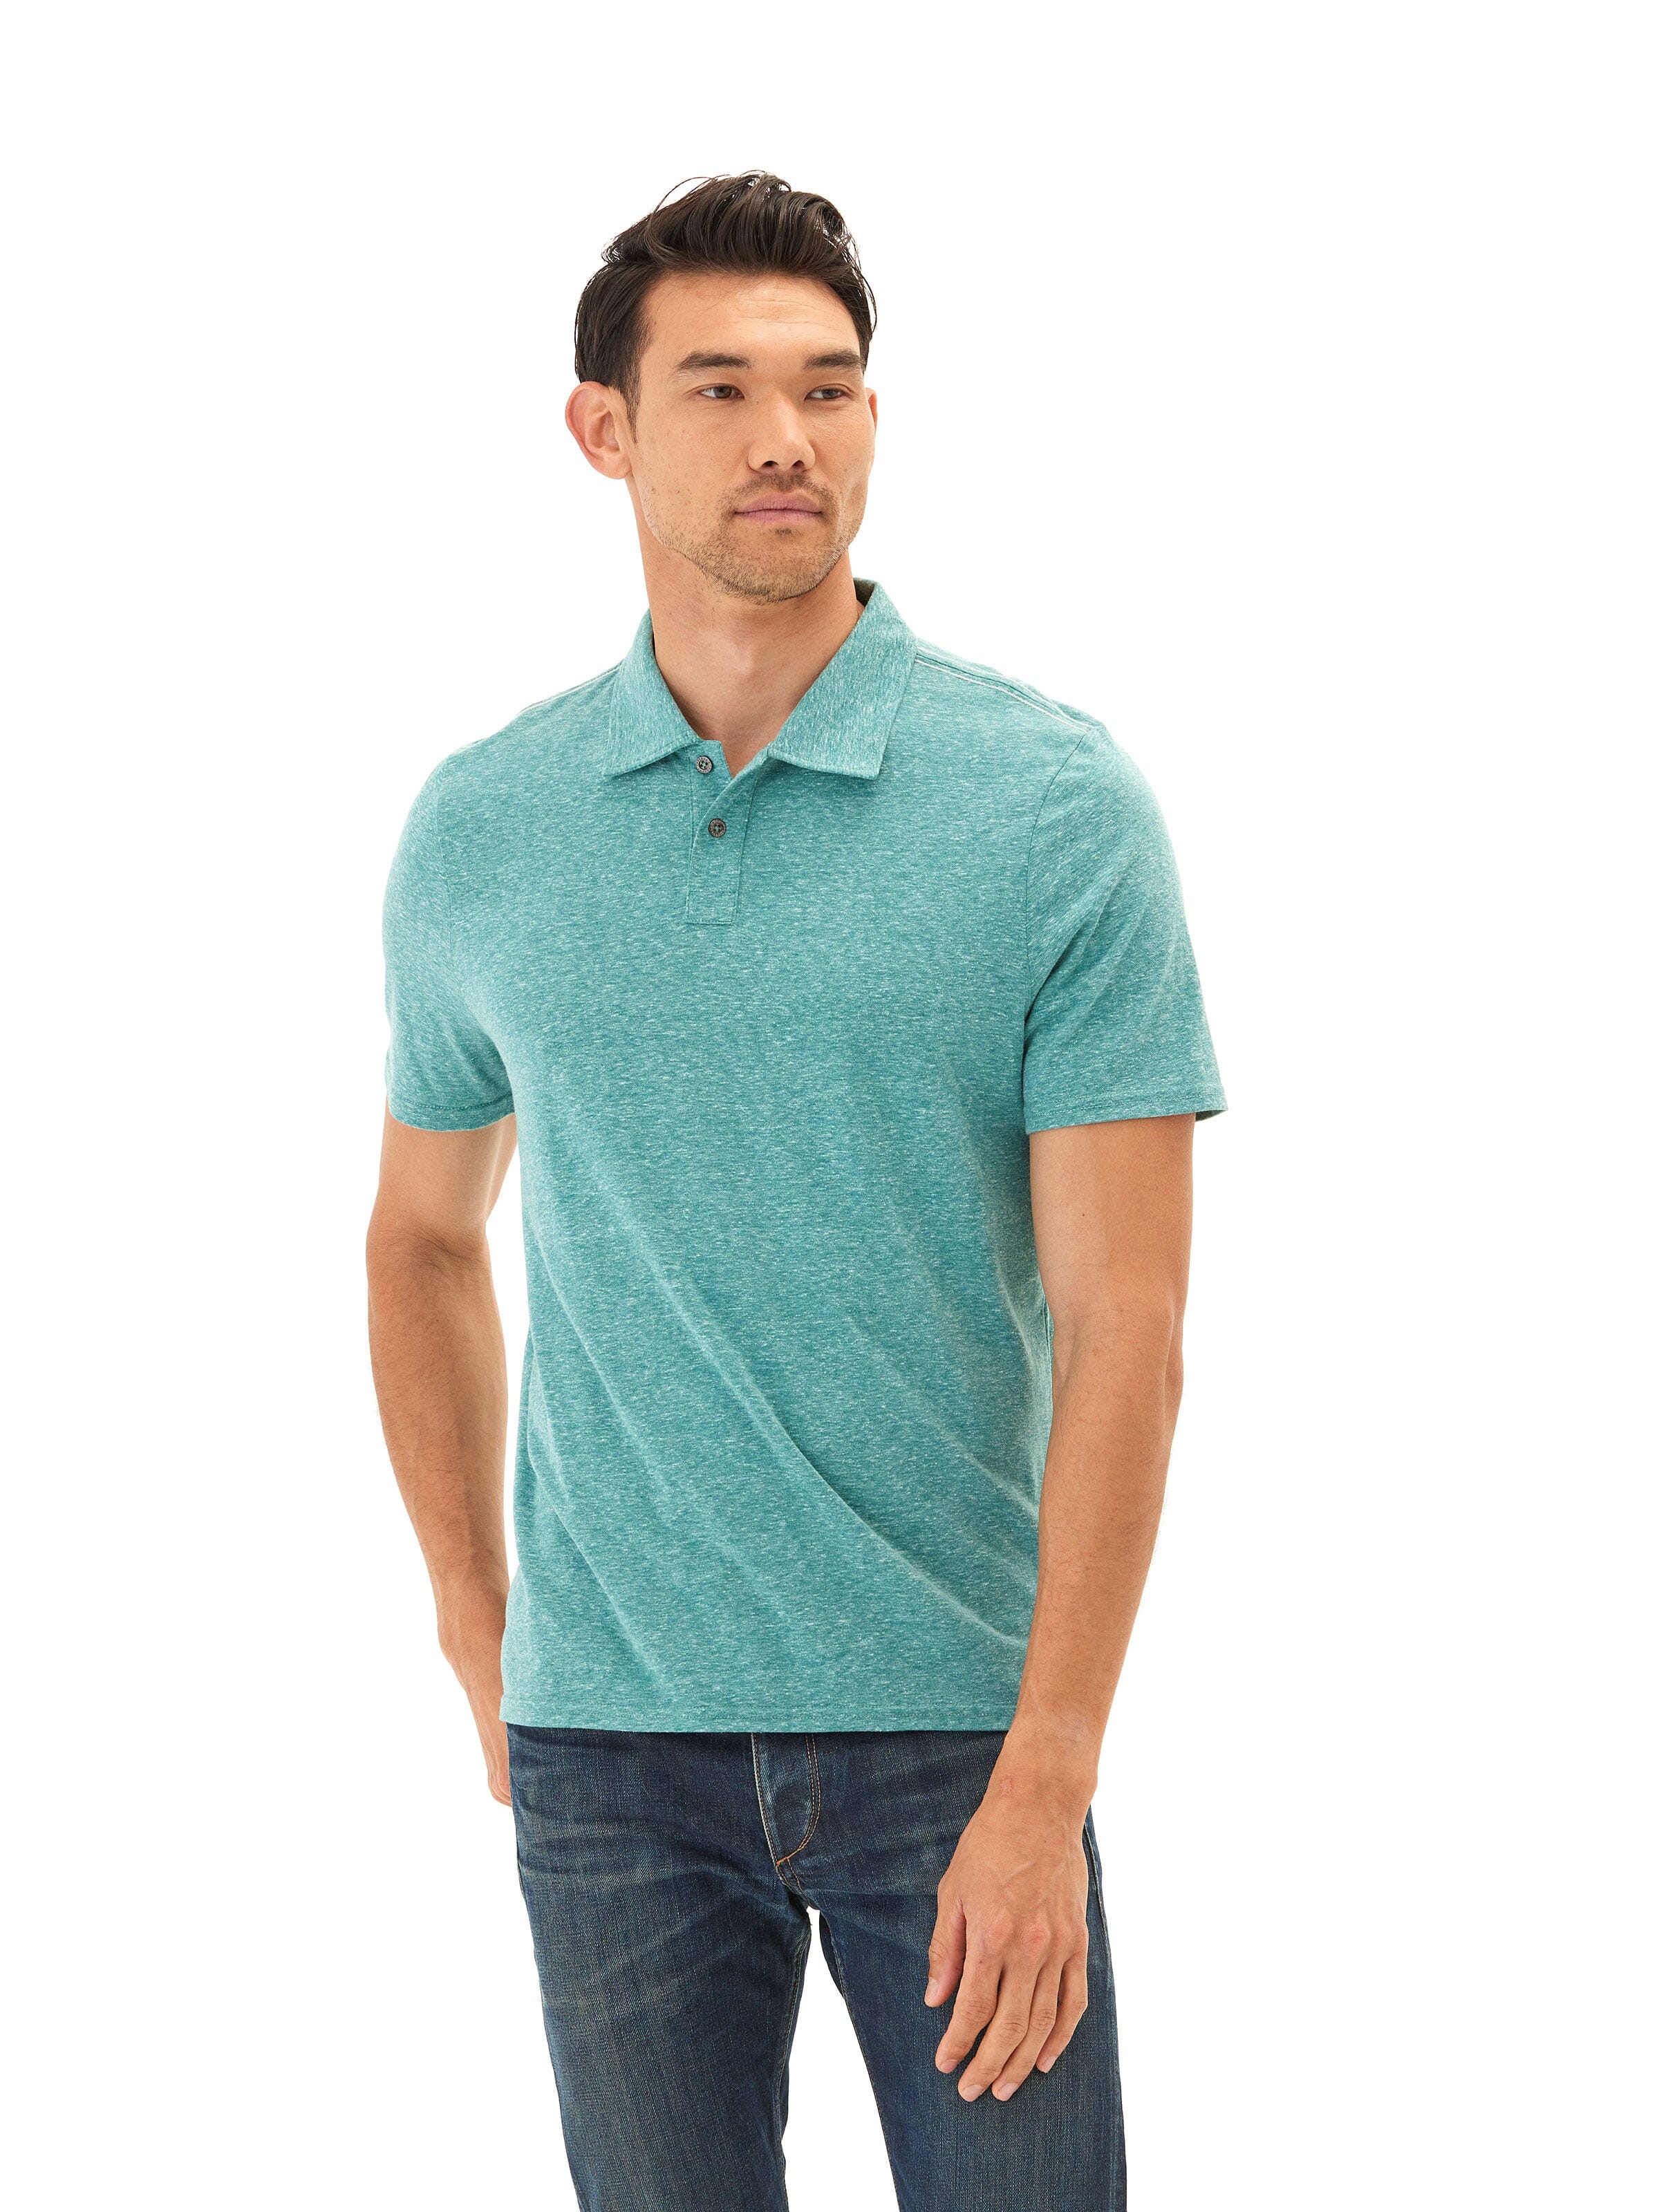 Baseline Triblend Jersey Polo Mens Tops Tshirt Short Polo Threads 4 Thought 